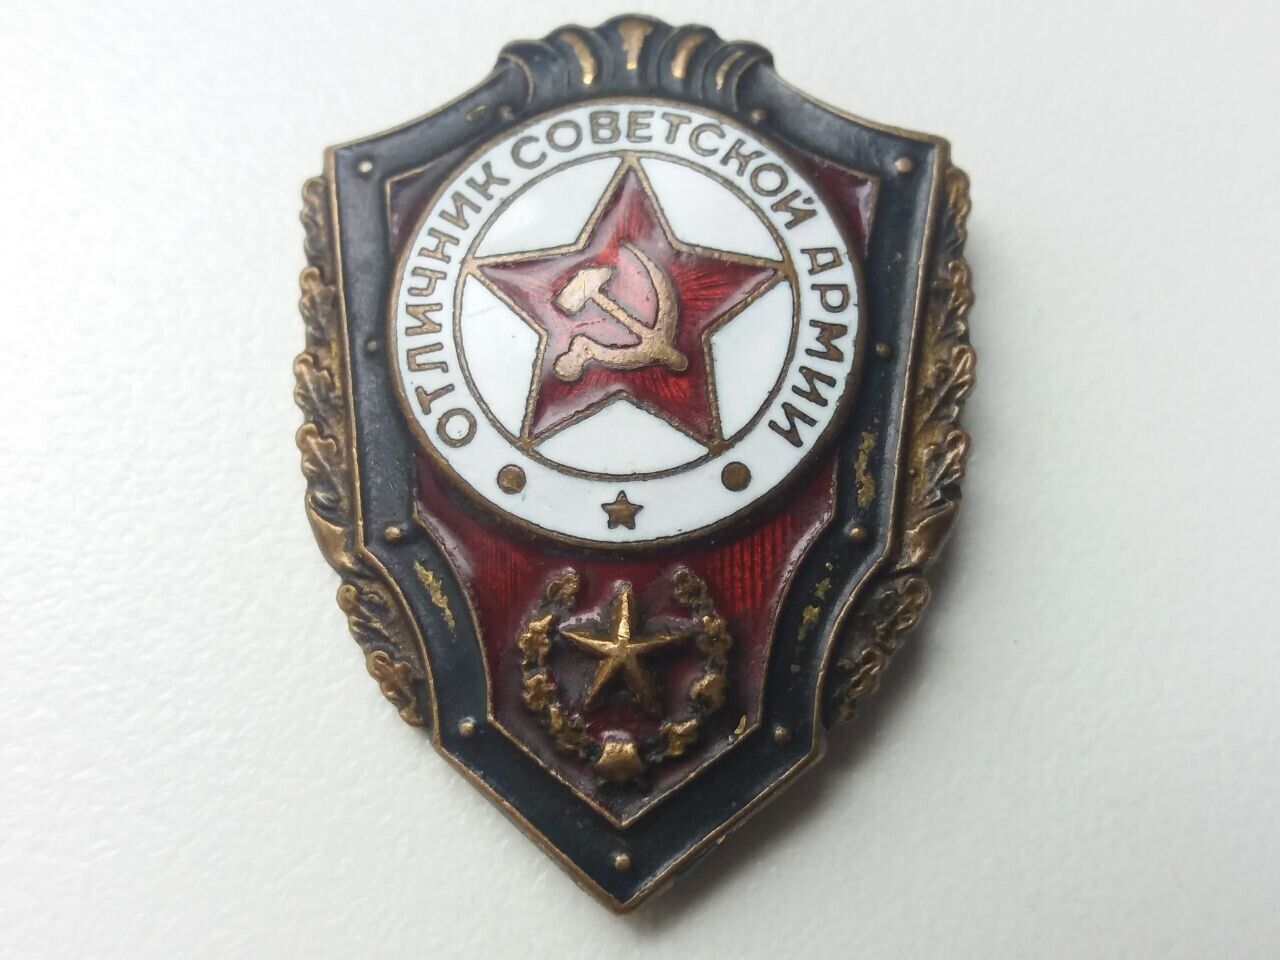 USSR Military Badge The Best Soldier of the Soviet Army, heavy, original